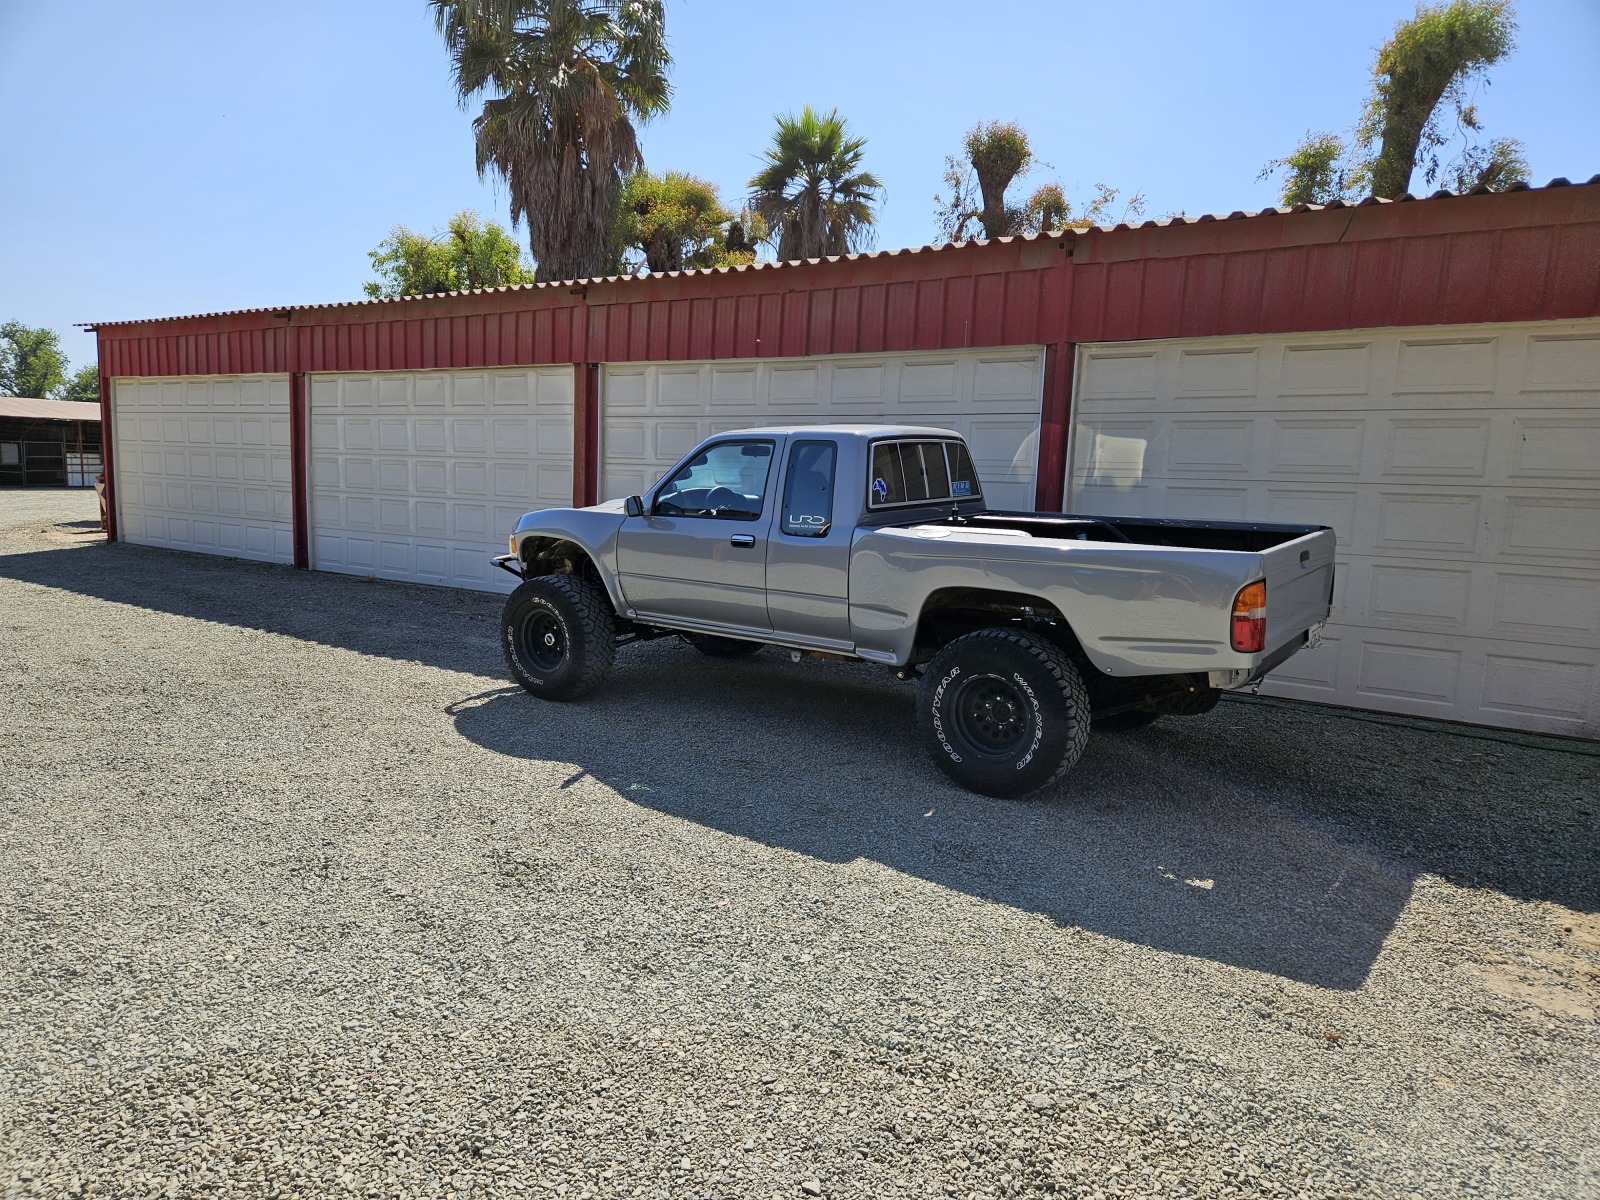 For Sale: 91 Toyota Pickup 4x4 Long Travel, 3.4 Swap Supercharger - photo2